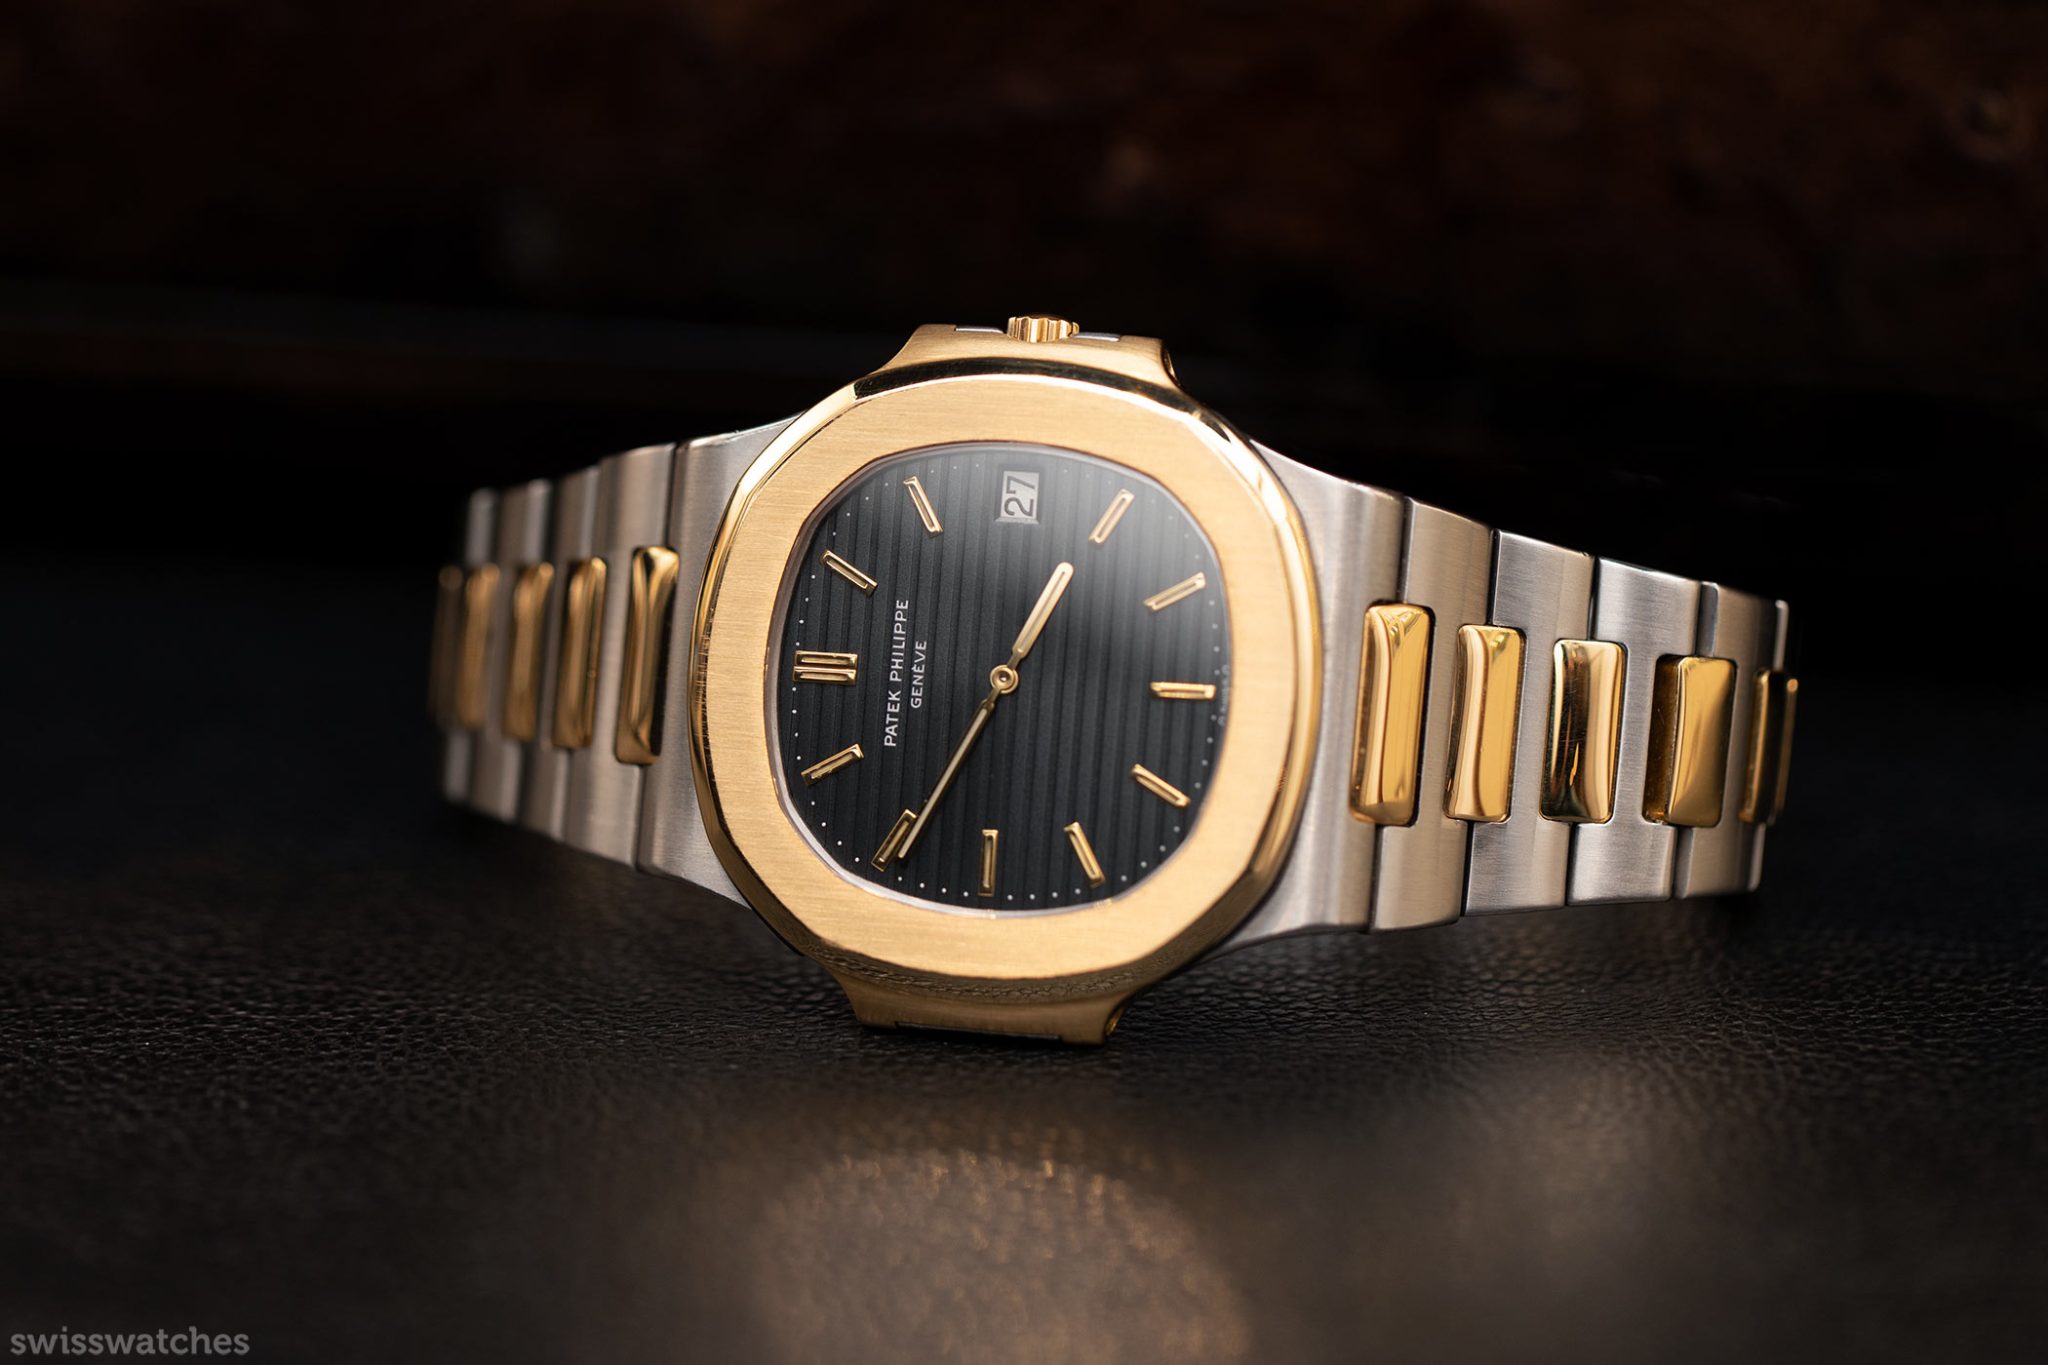 Square Patek Philippe Nautilus Watch, For Personal Use, Model Name/Number:  571910G